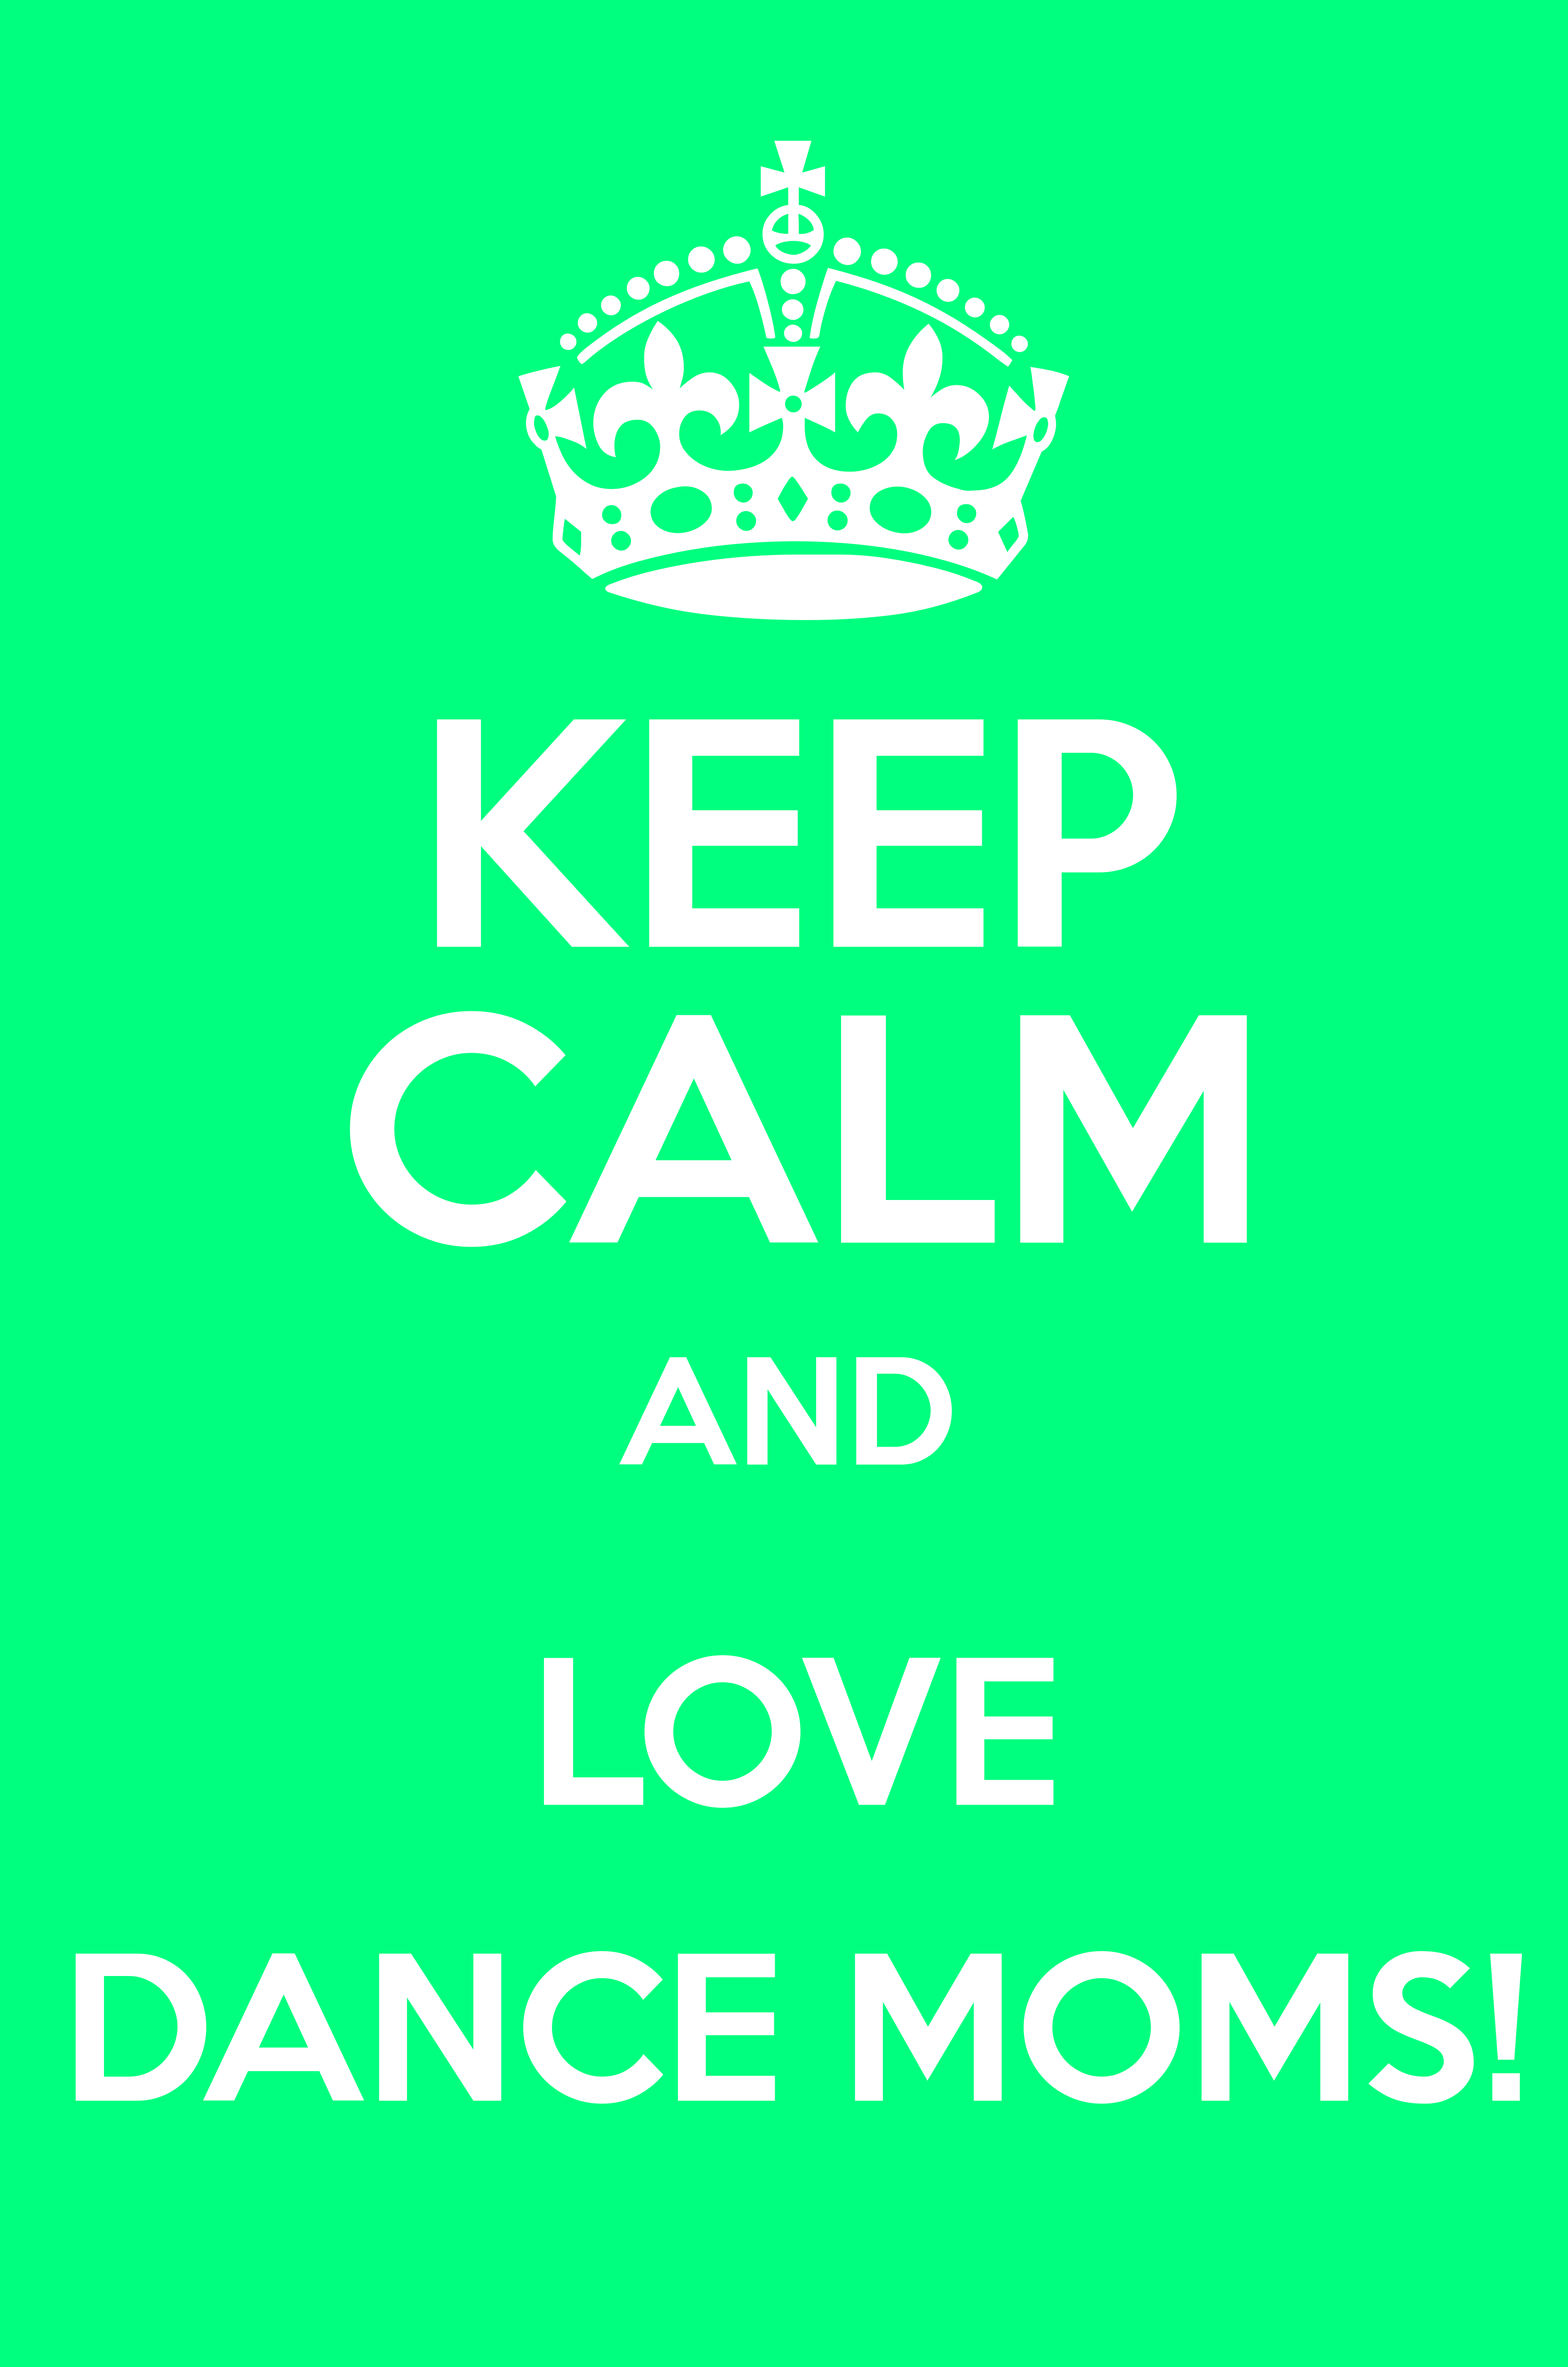 KEEP CALM AND LOVE DANCE MOMS! Calm and Posters Generator